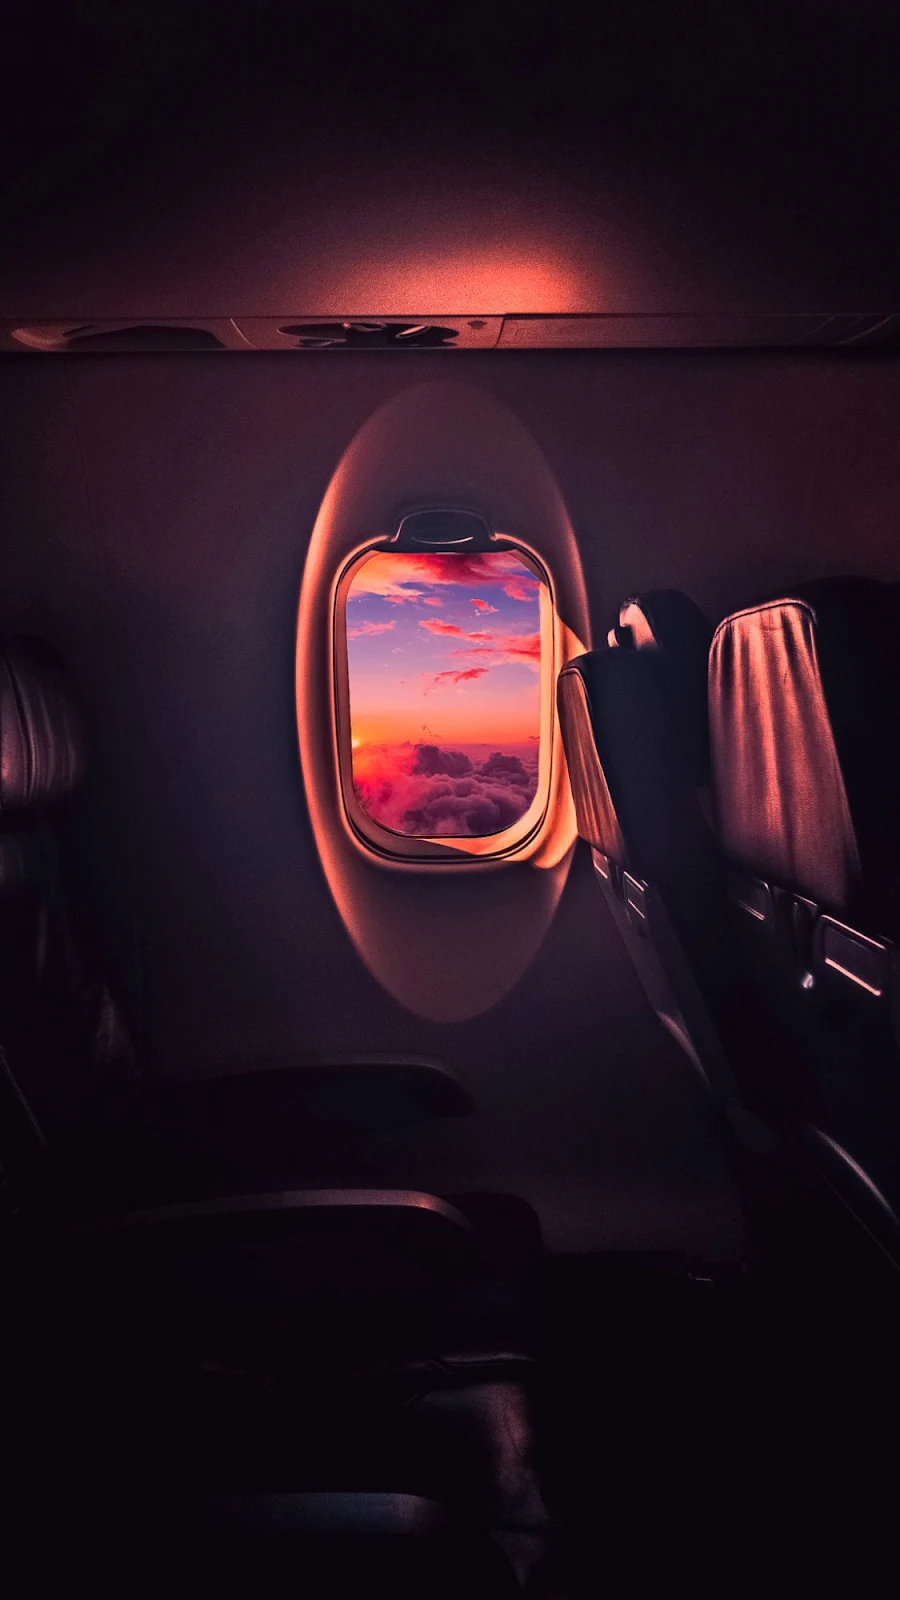 A Cool Flight Asthetic, Flight, Airplane, Air Travel, Travel Full HD iPhone Wallpaper for Free Download in High Quality [1125x2000]